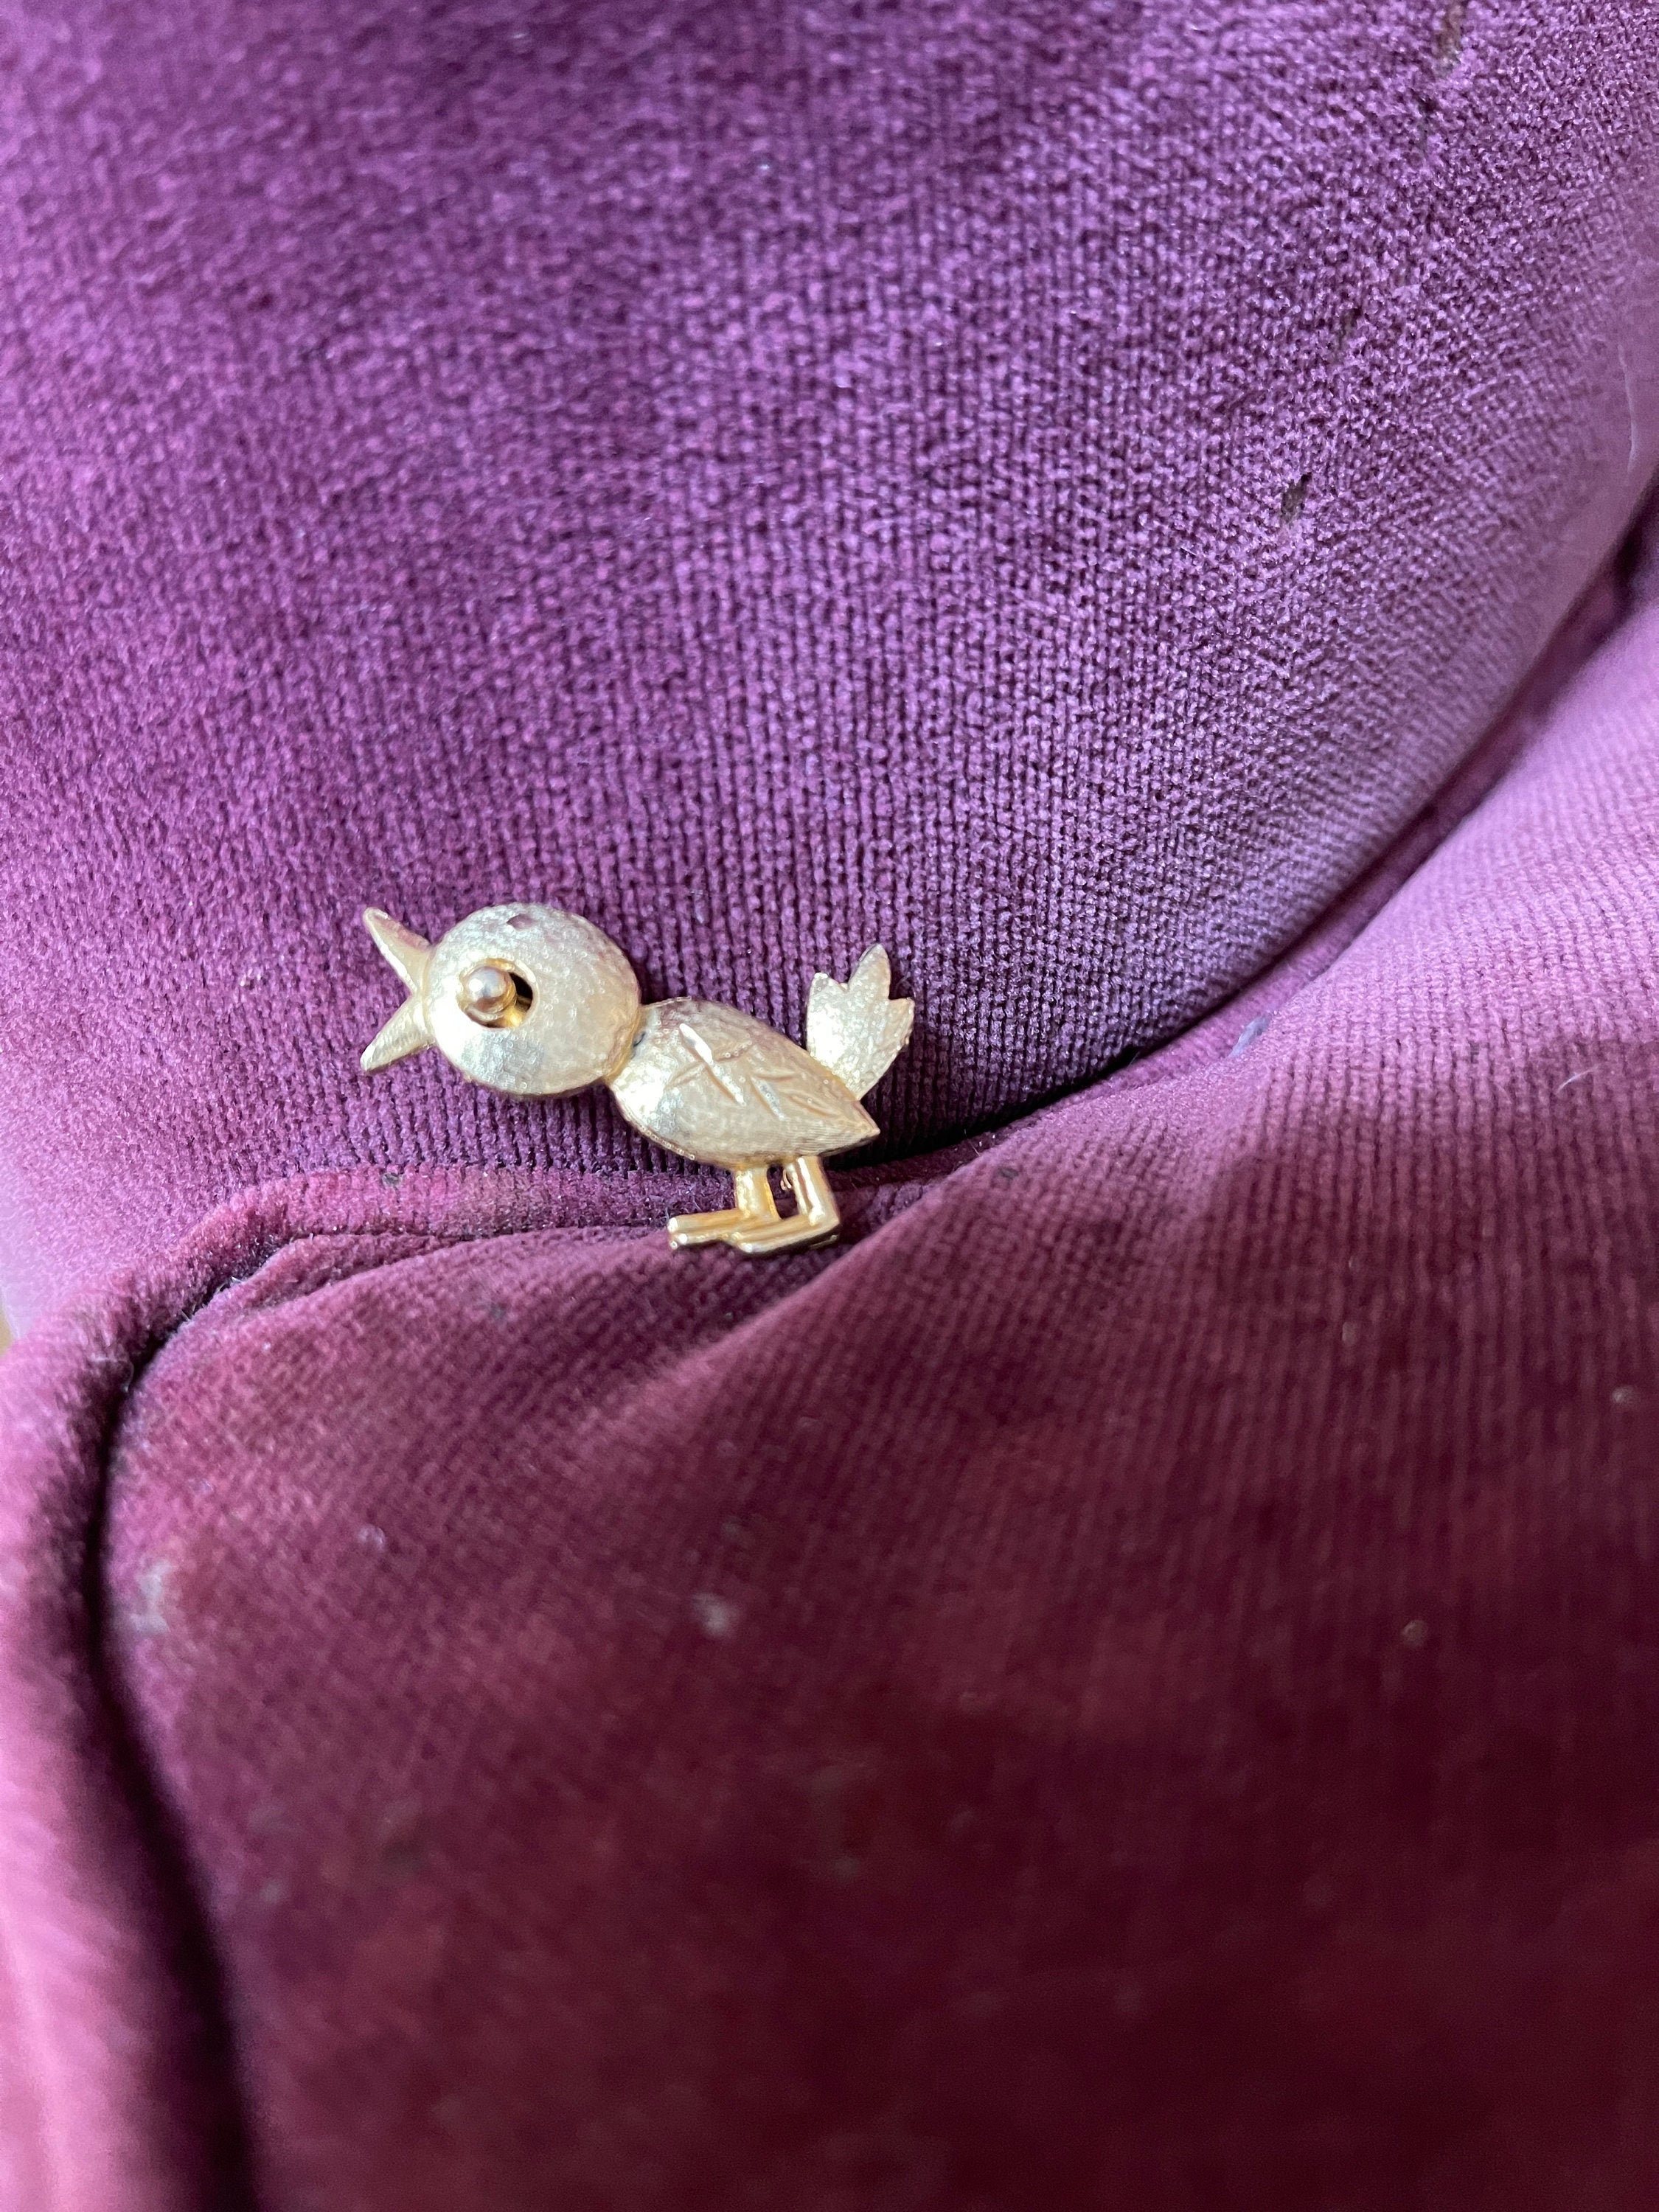 Details about   Vintage Bird Chick Pin Brooch Singing Mid Century Gold tone Jewelry Dubarry 